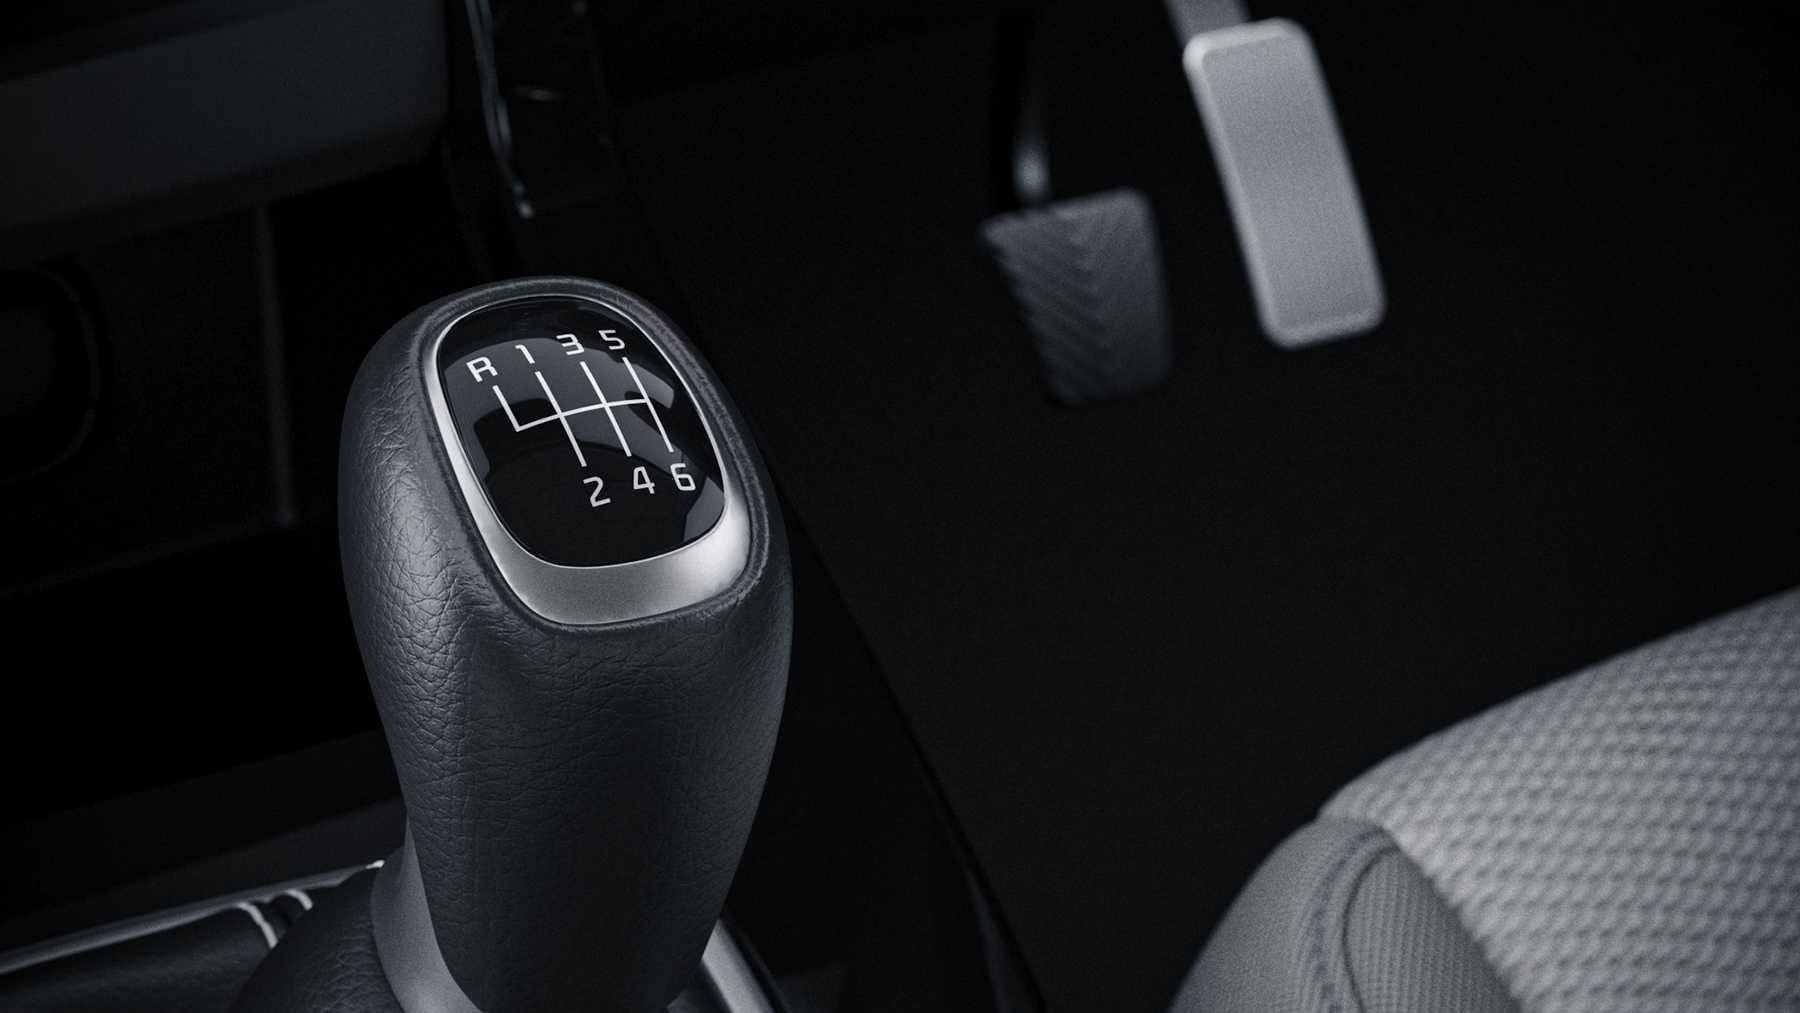 The Kia Seltos is the first midsize SUV to get an intelligent manual transmission (iMT) option. Image: Kia